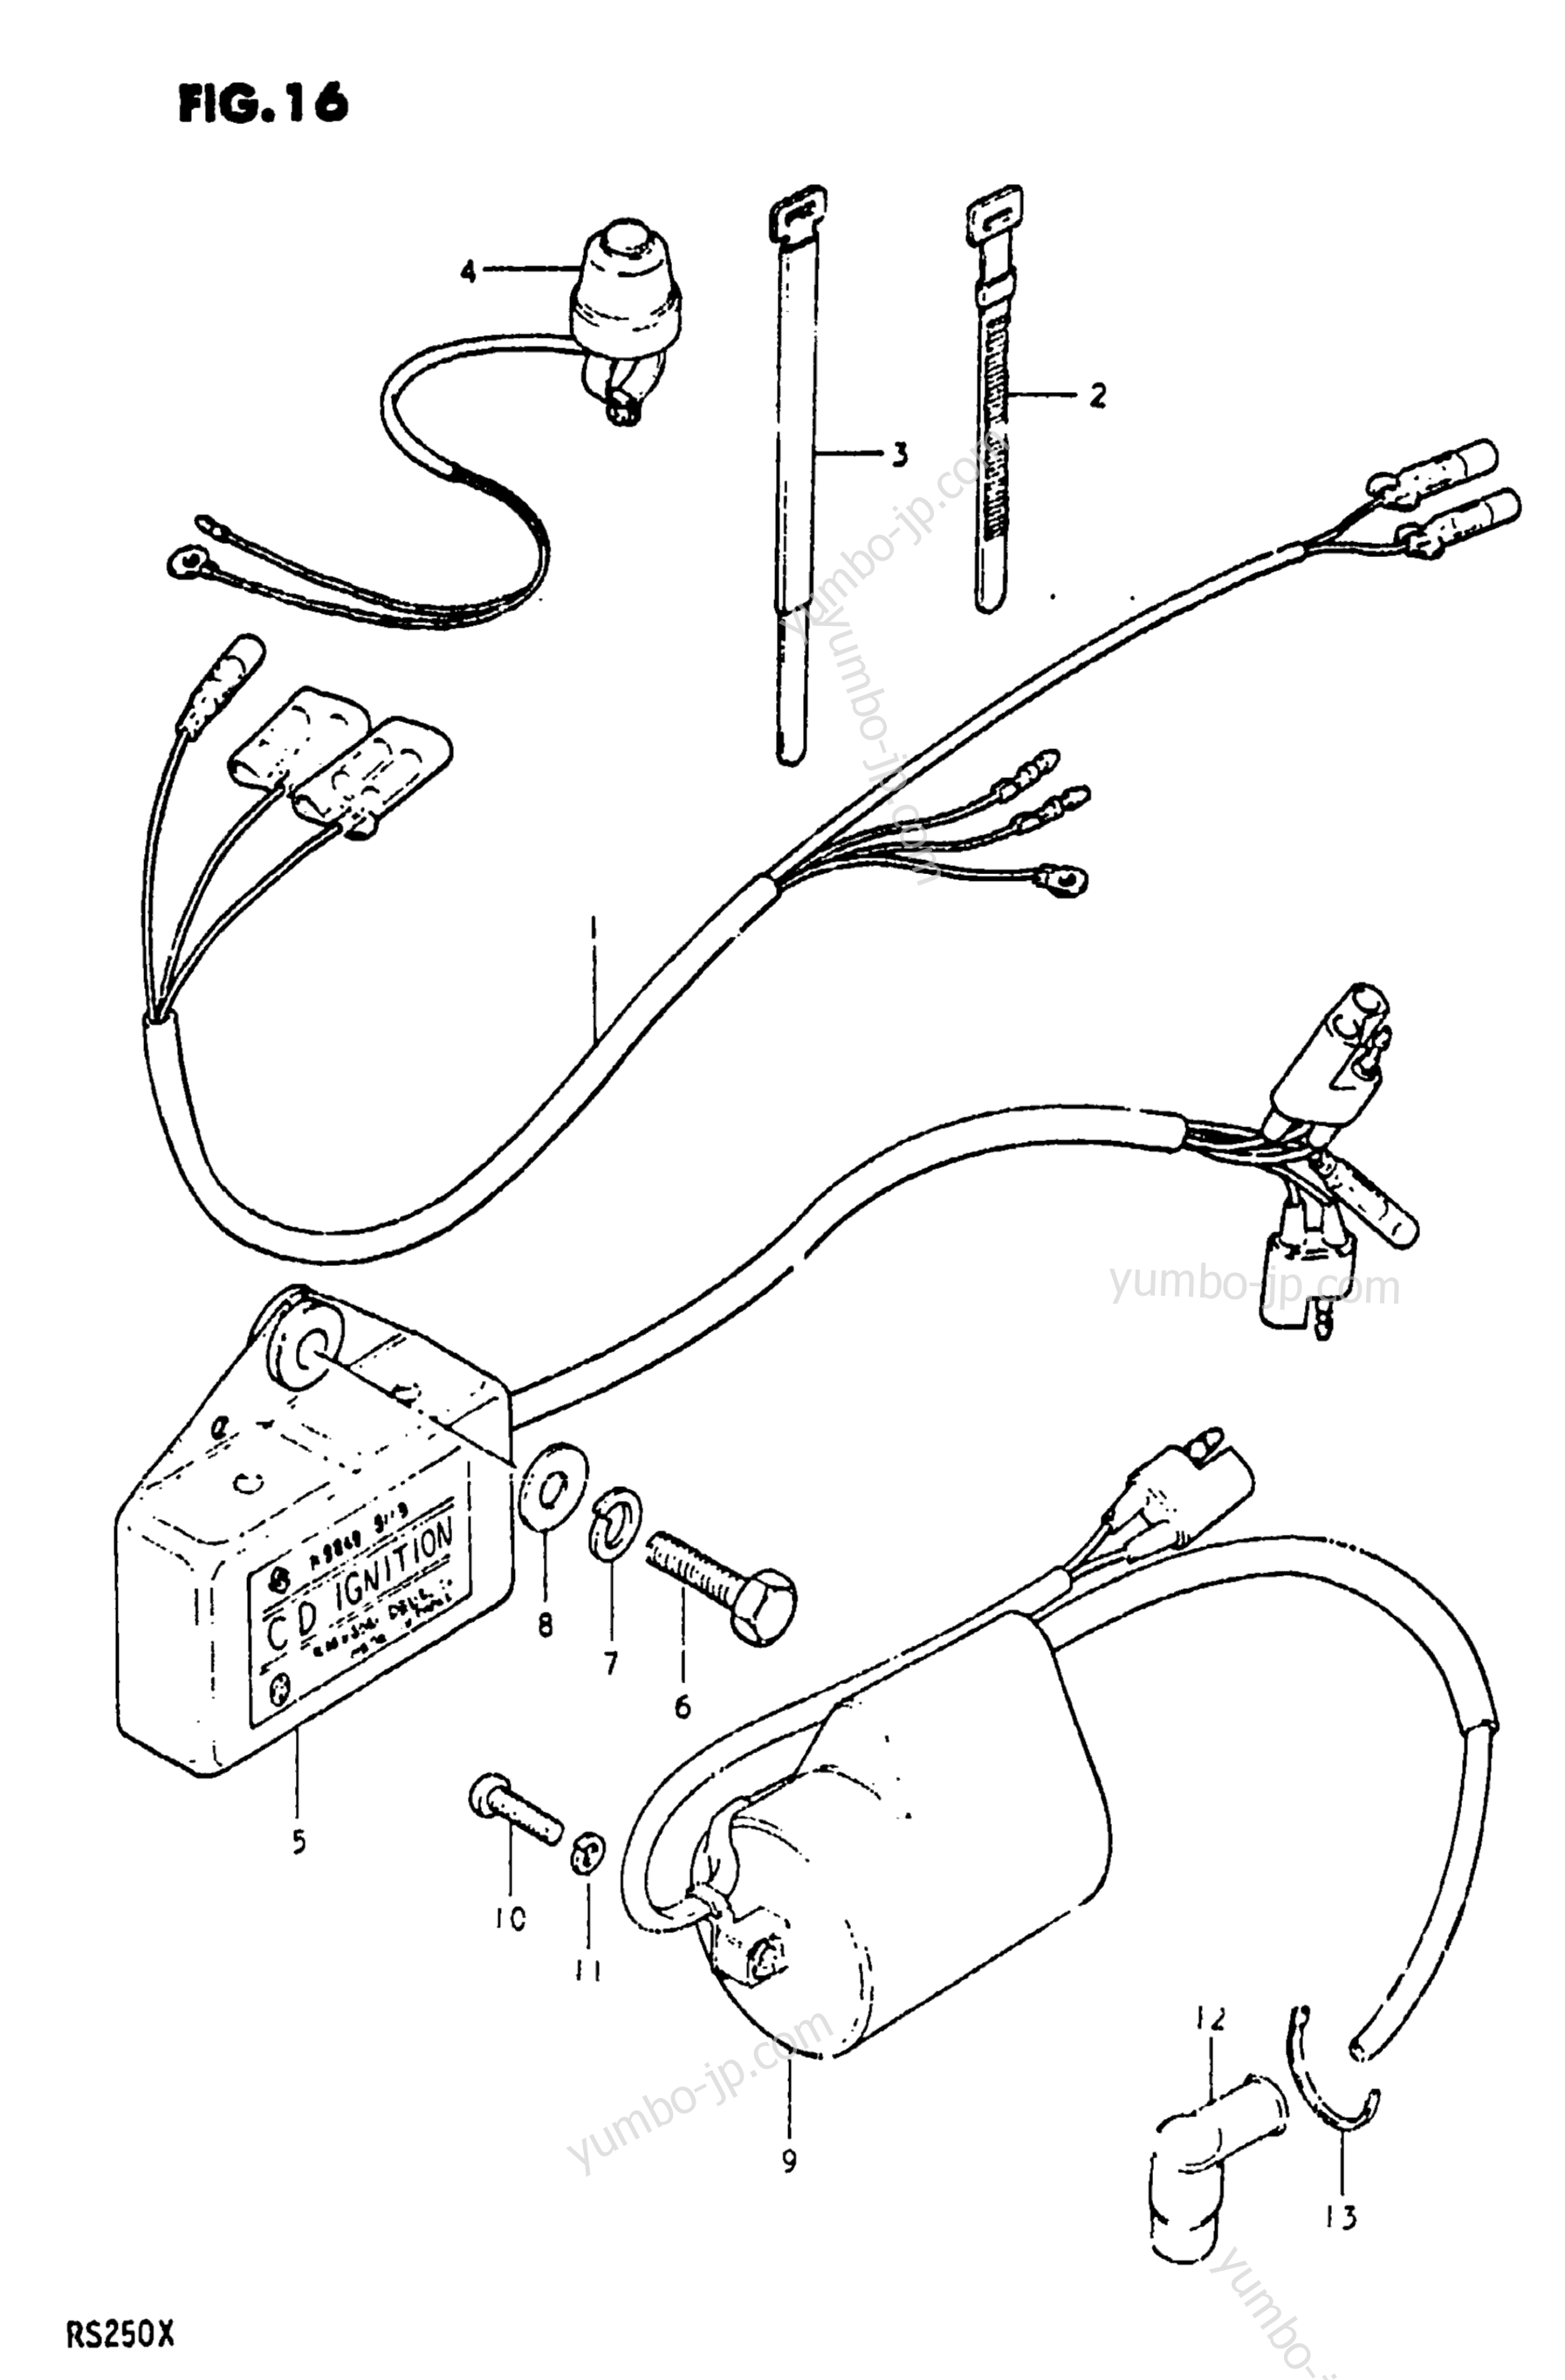 Electrical for motorcycles SUZUKI RS250 1980 year